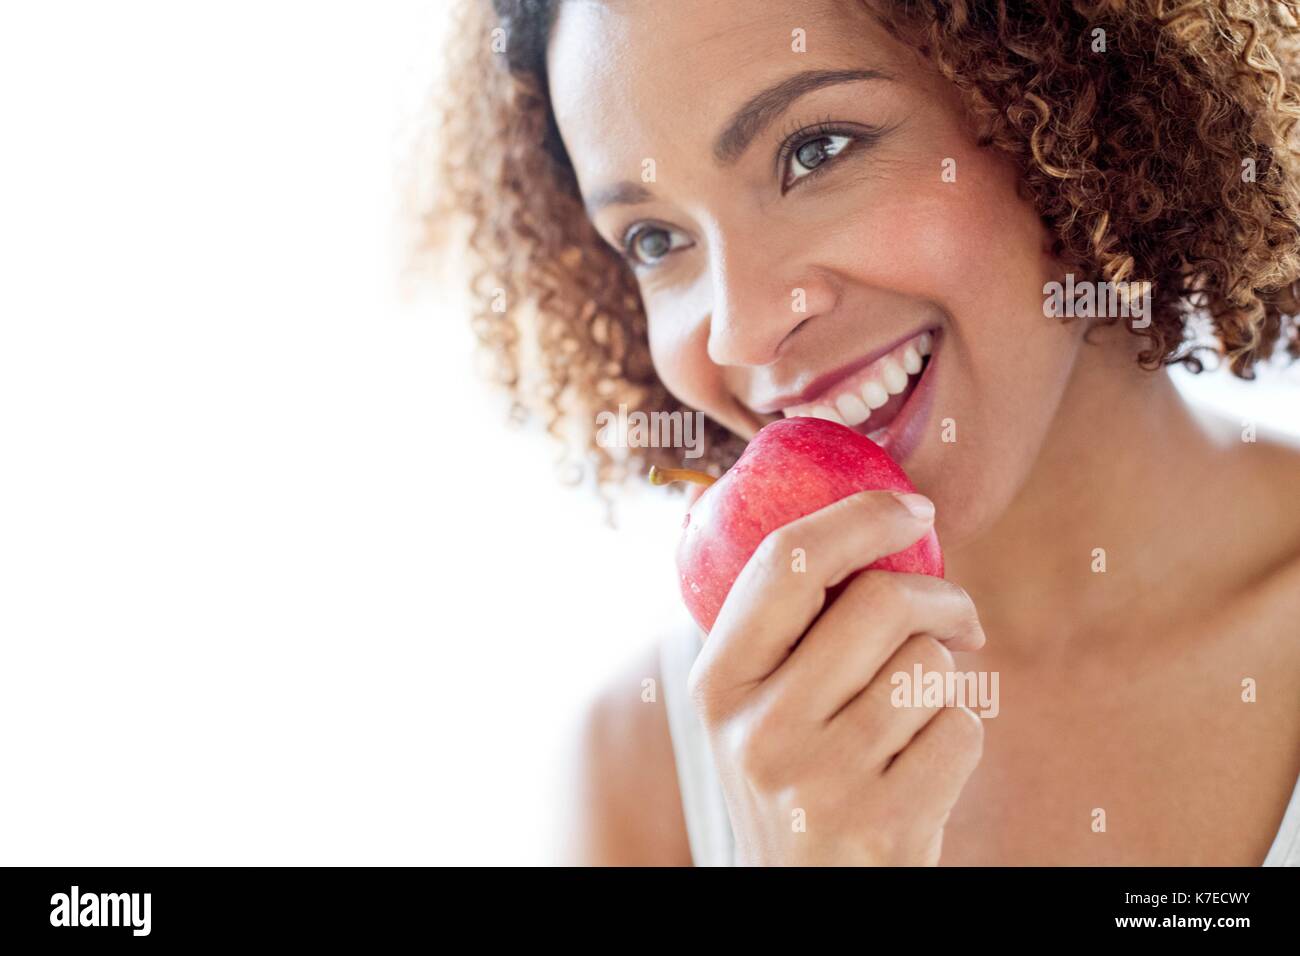 Mid adult woman eating apple. Banque D'Images